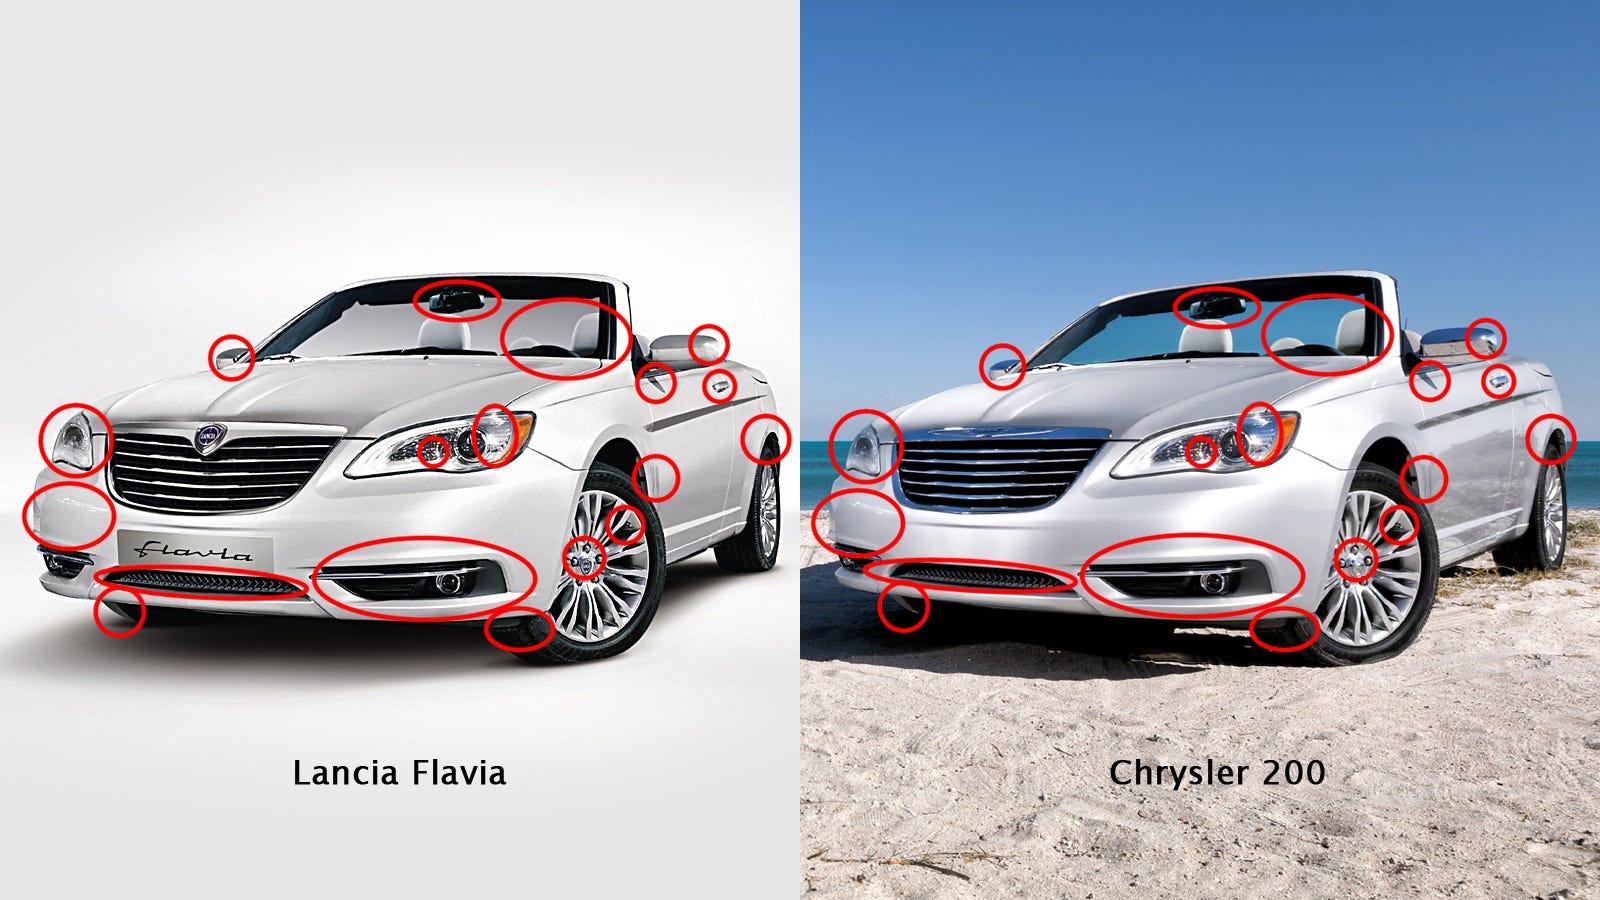 Do Lancia's new cars exist only in Photoshop?